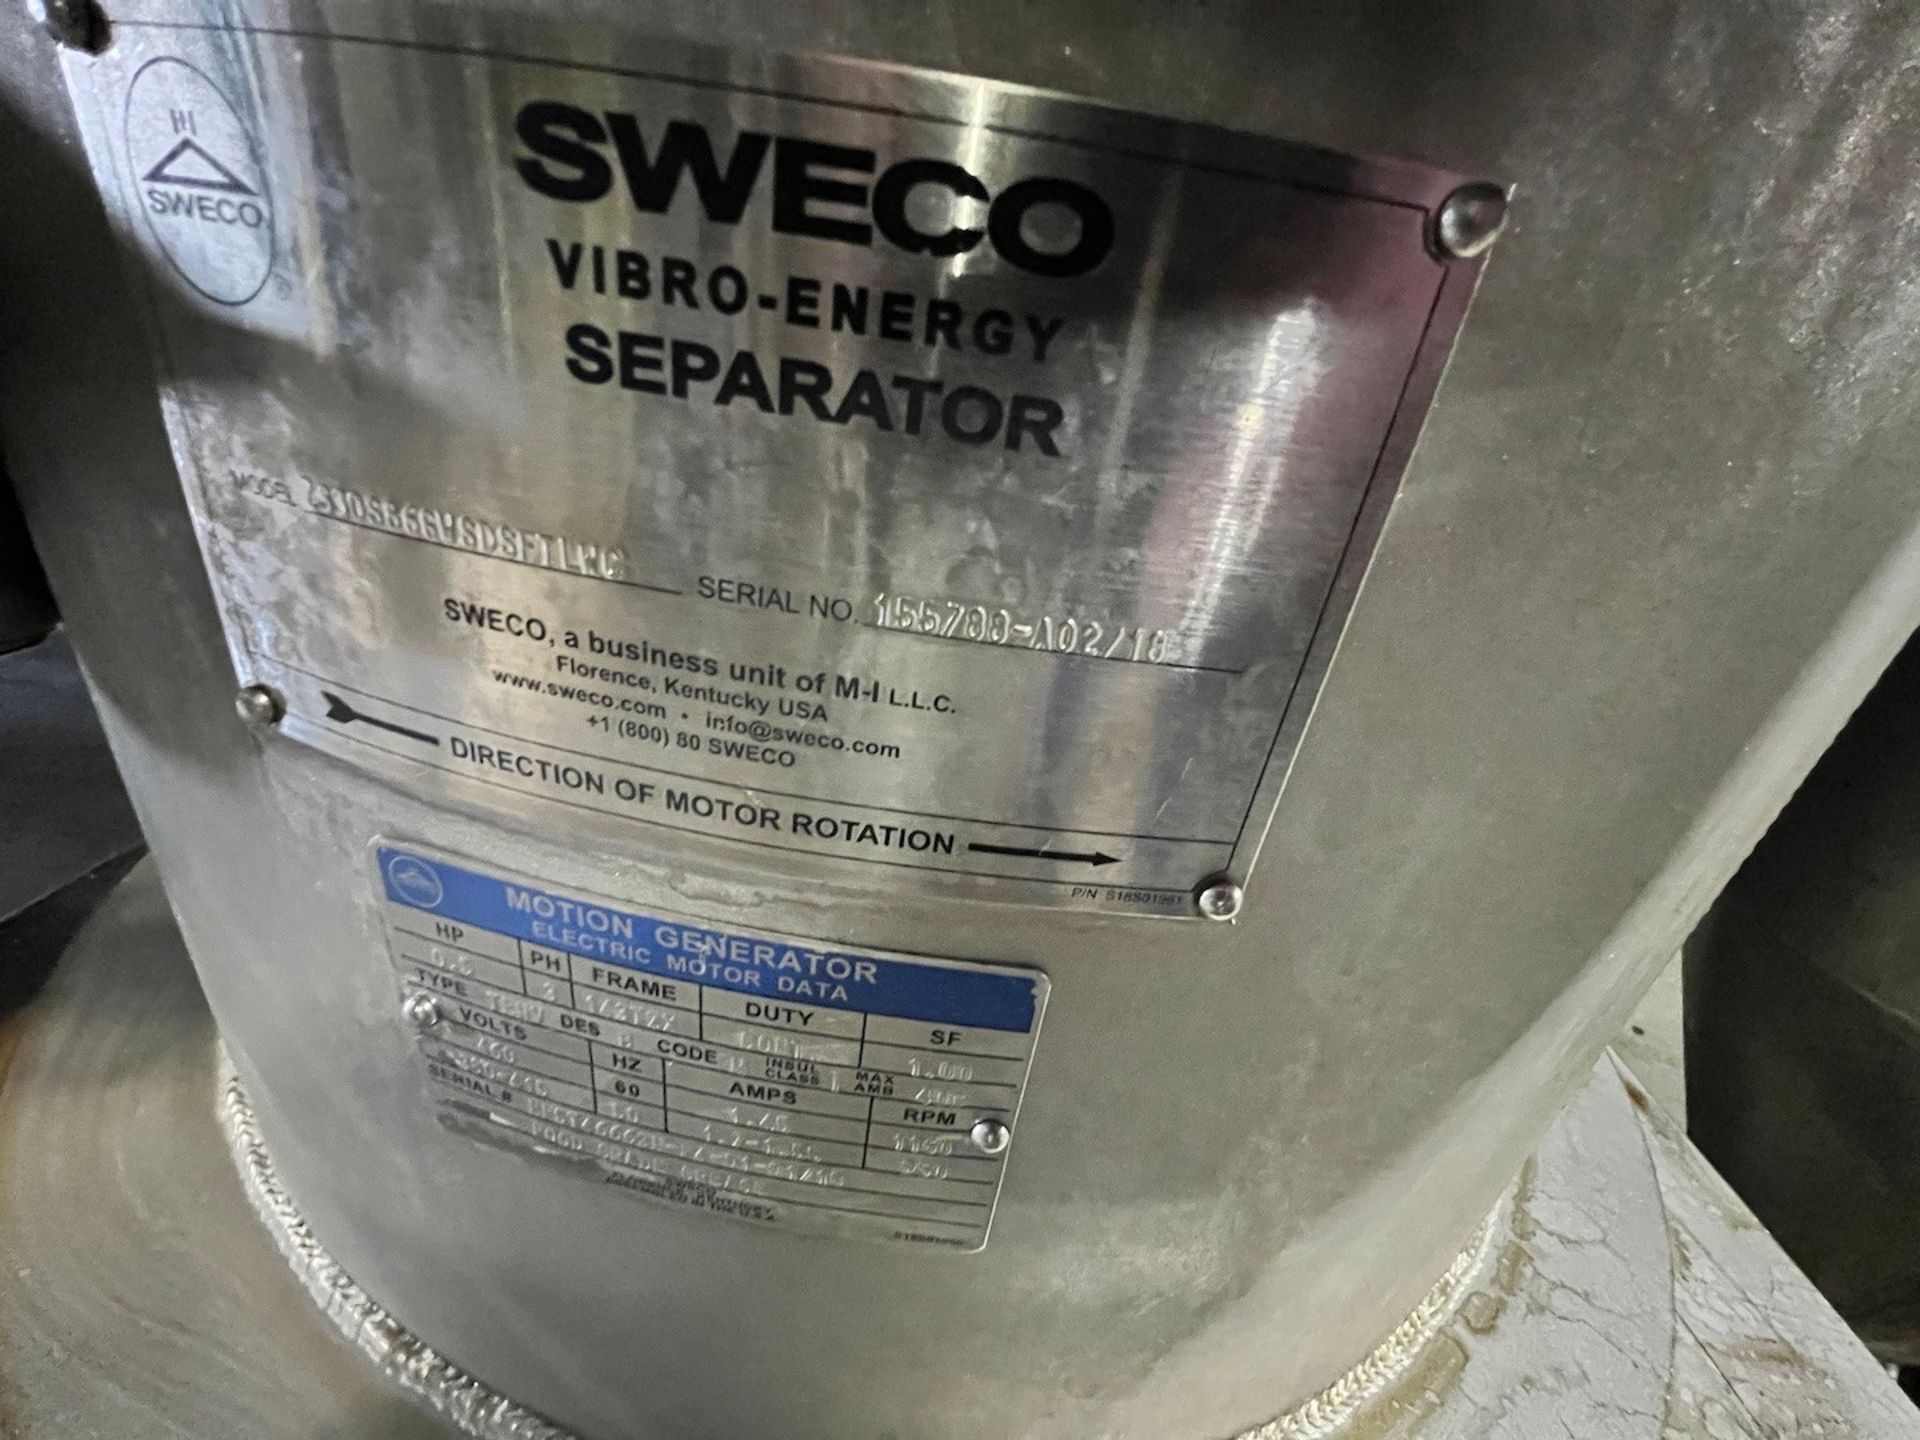 SWECO VIBRO-ENERGY APPROX 32 IN. W SEPARATOR, MODEL ZS30S866WSDSFTLWC, S/N 155788-A02/18, 1/2 HP ( - Image 5 of 5